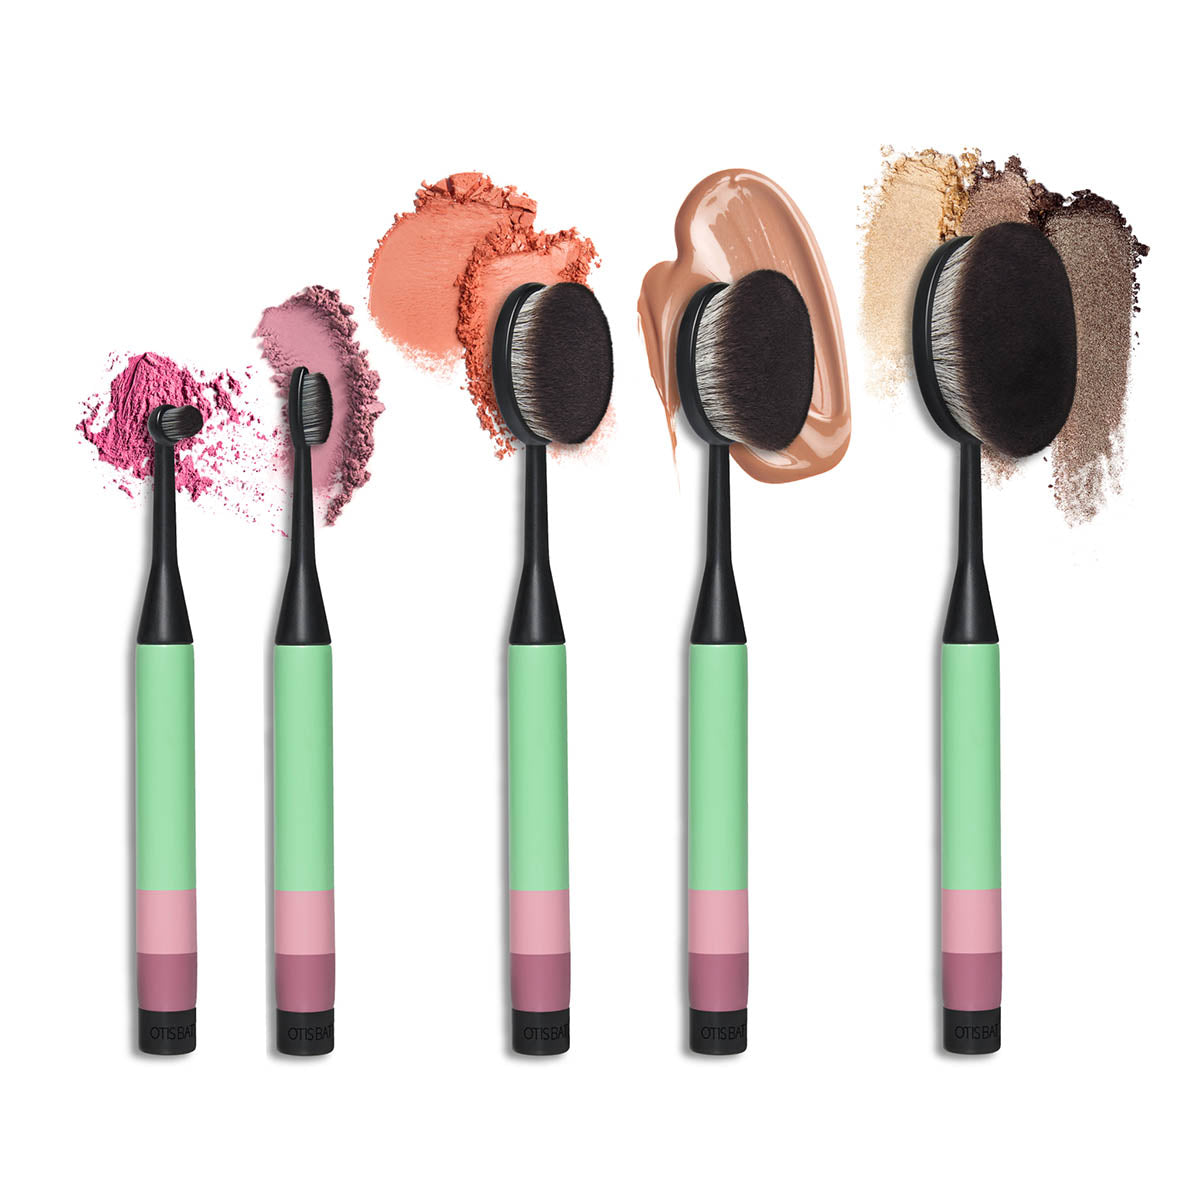 Oval Makeup Brushes